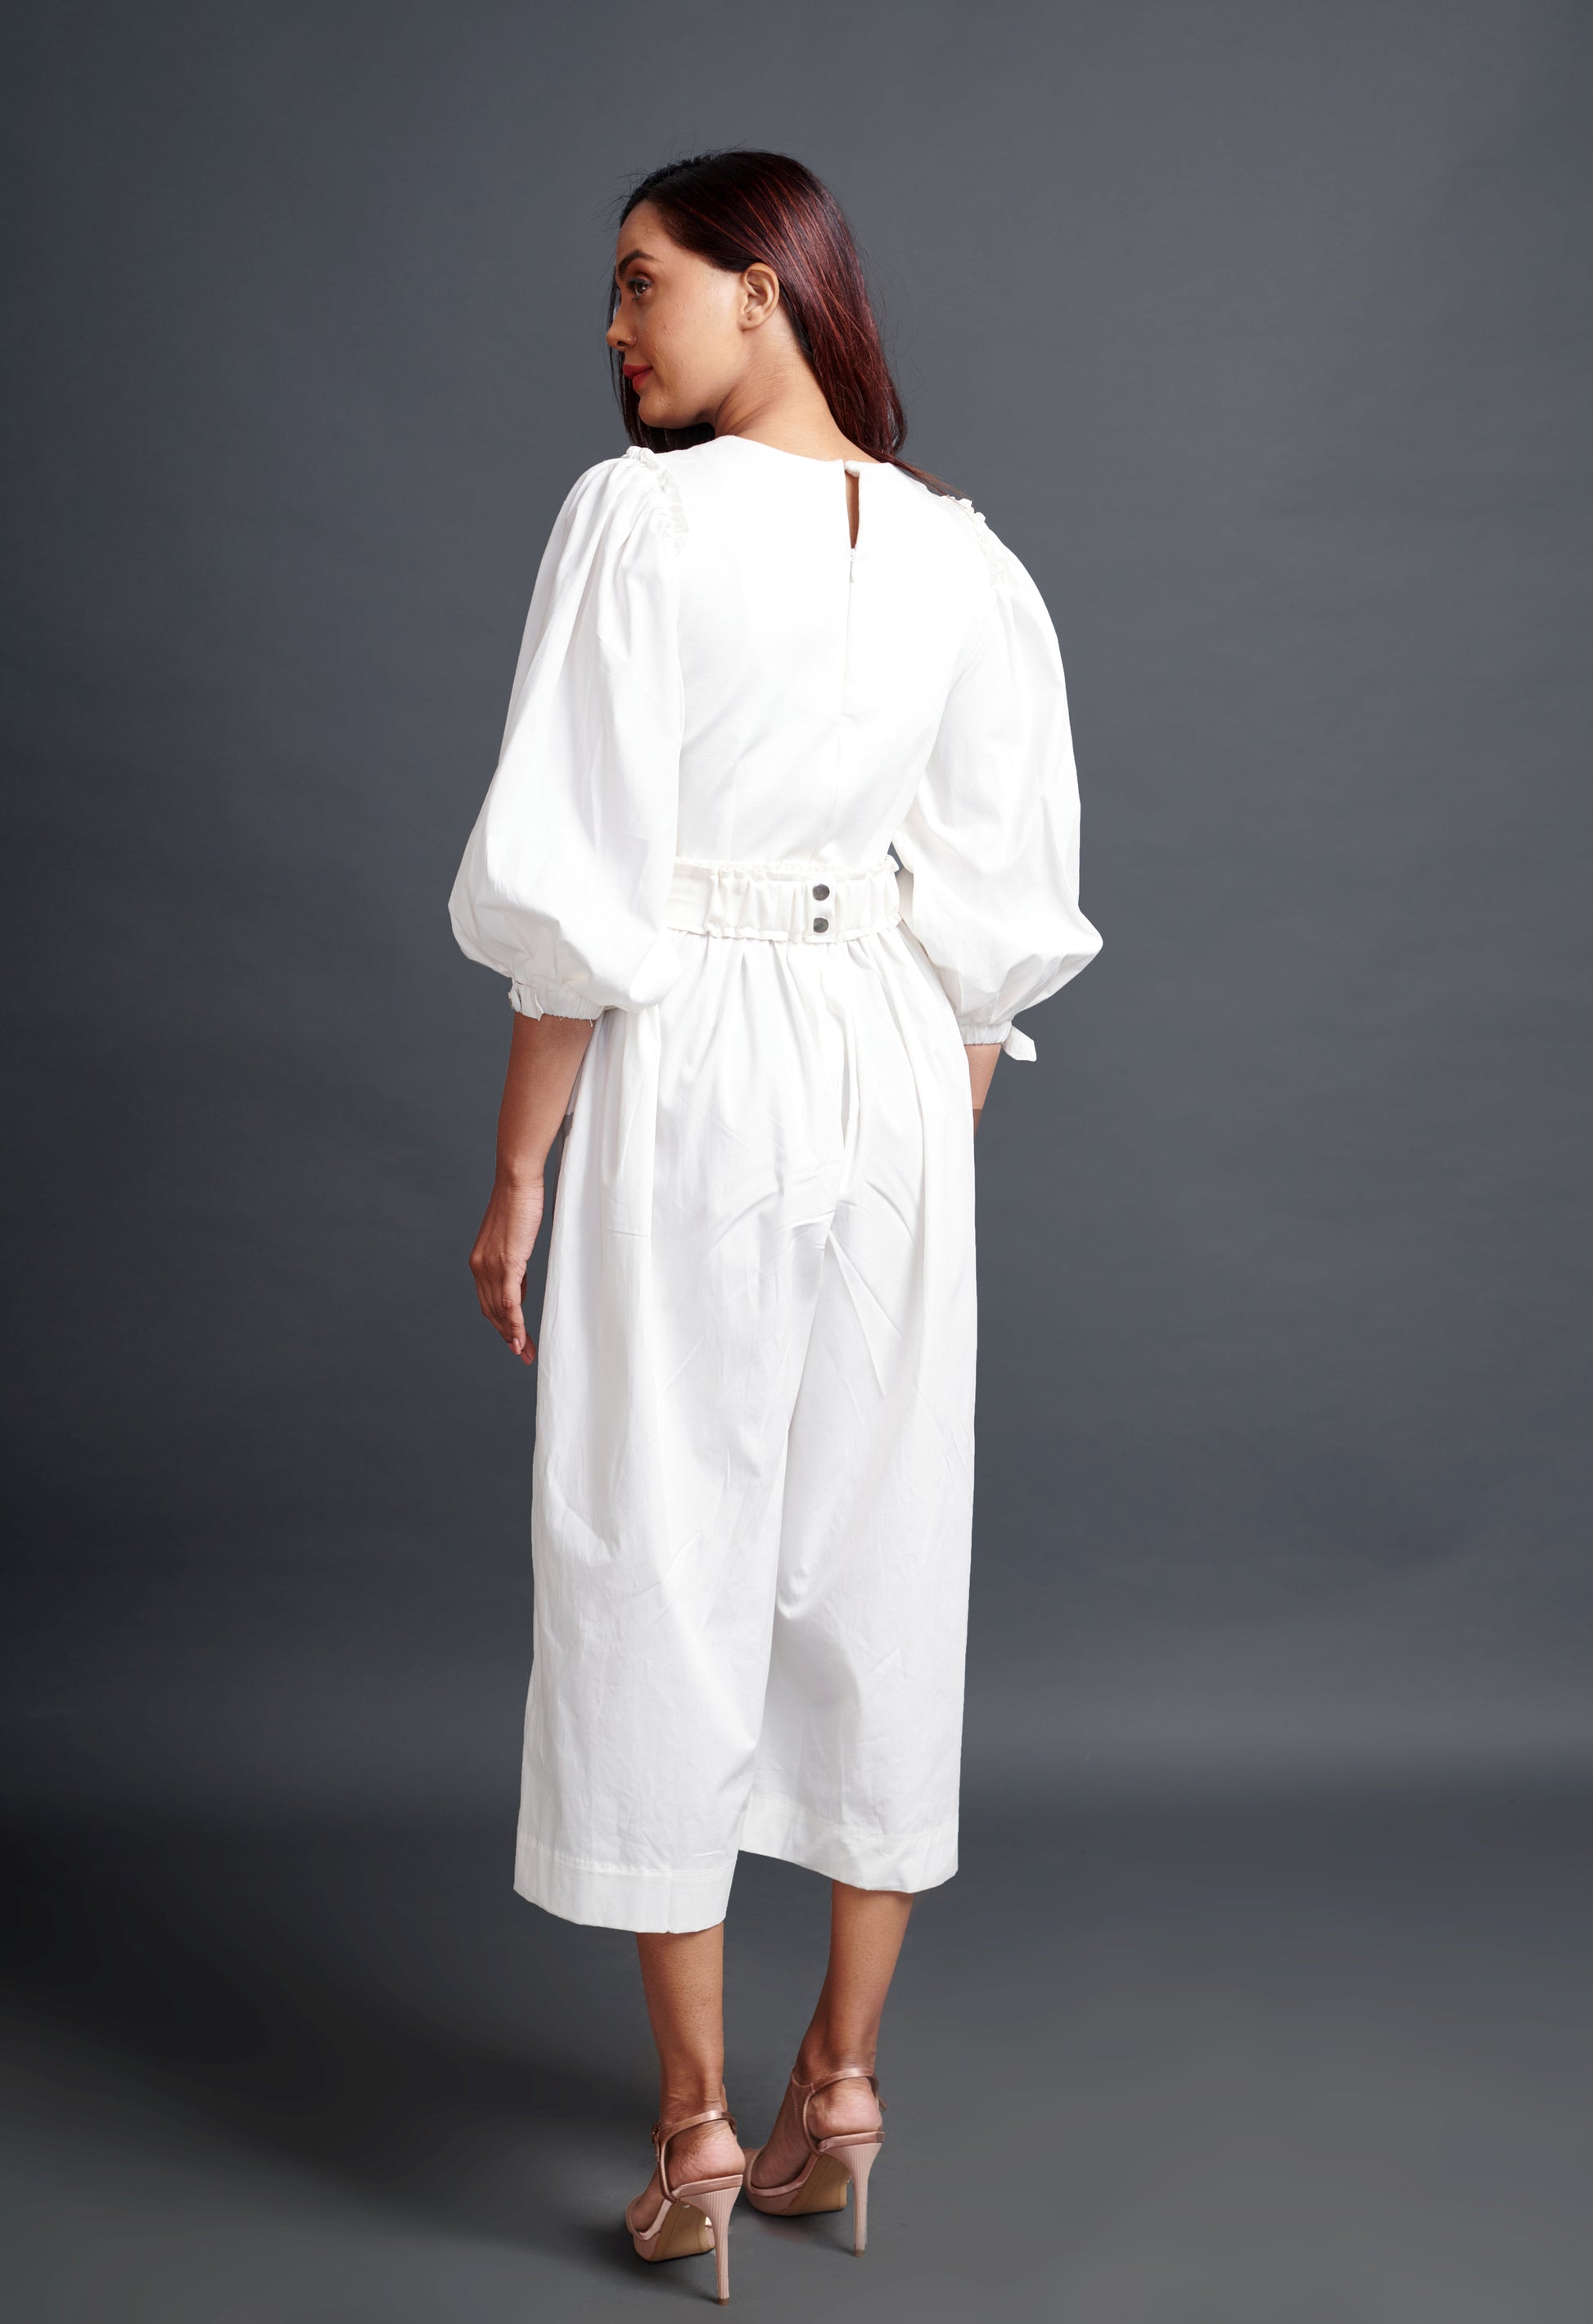 Image of WHITE MONOCROM JUMPSUIT WITH NEOE CONFETTI BELT. From savoirfashions.com